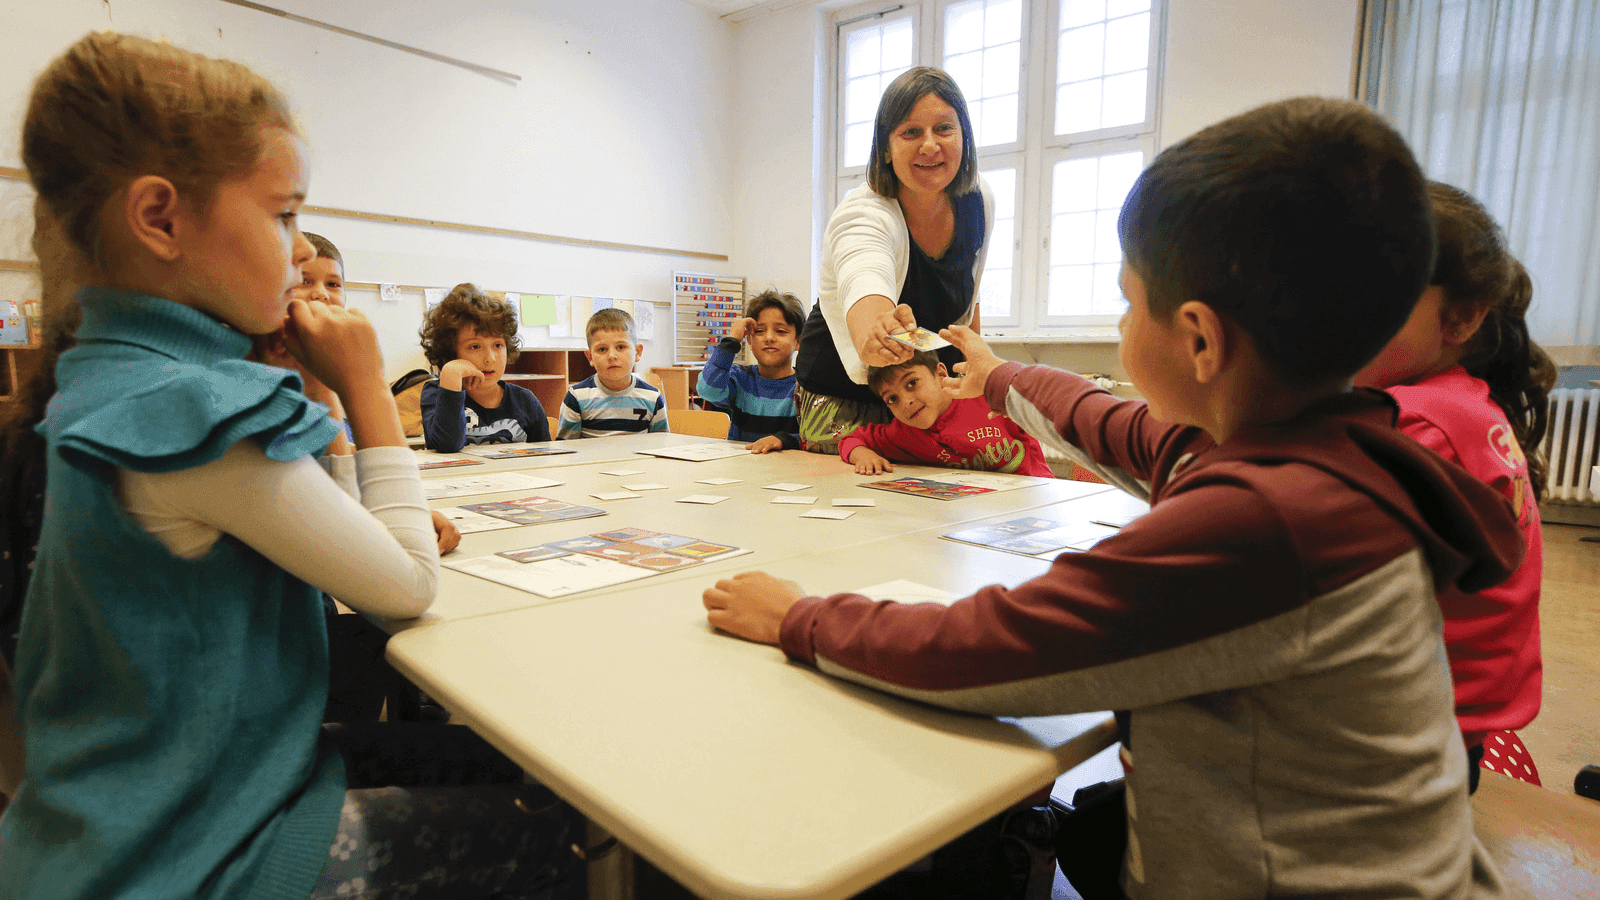 refugee children take an integration class in Germany